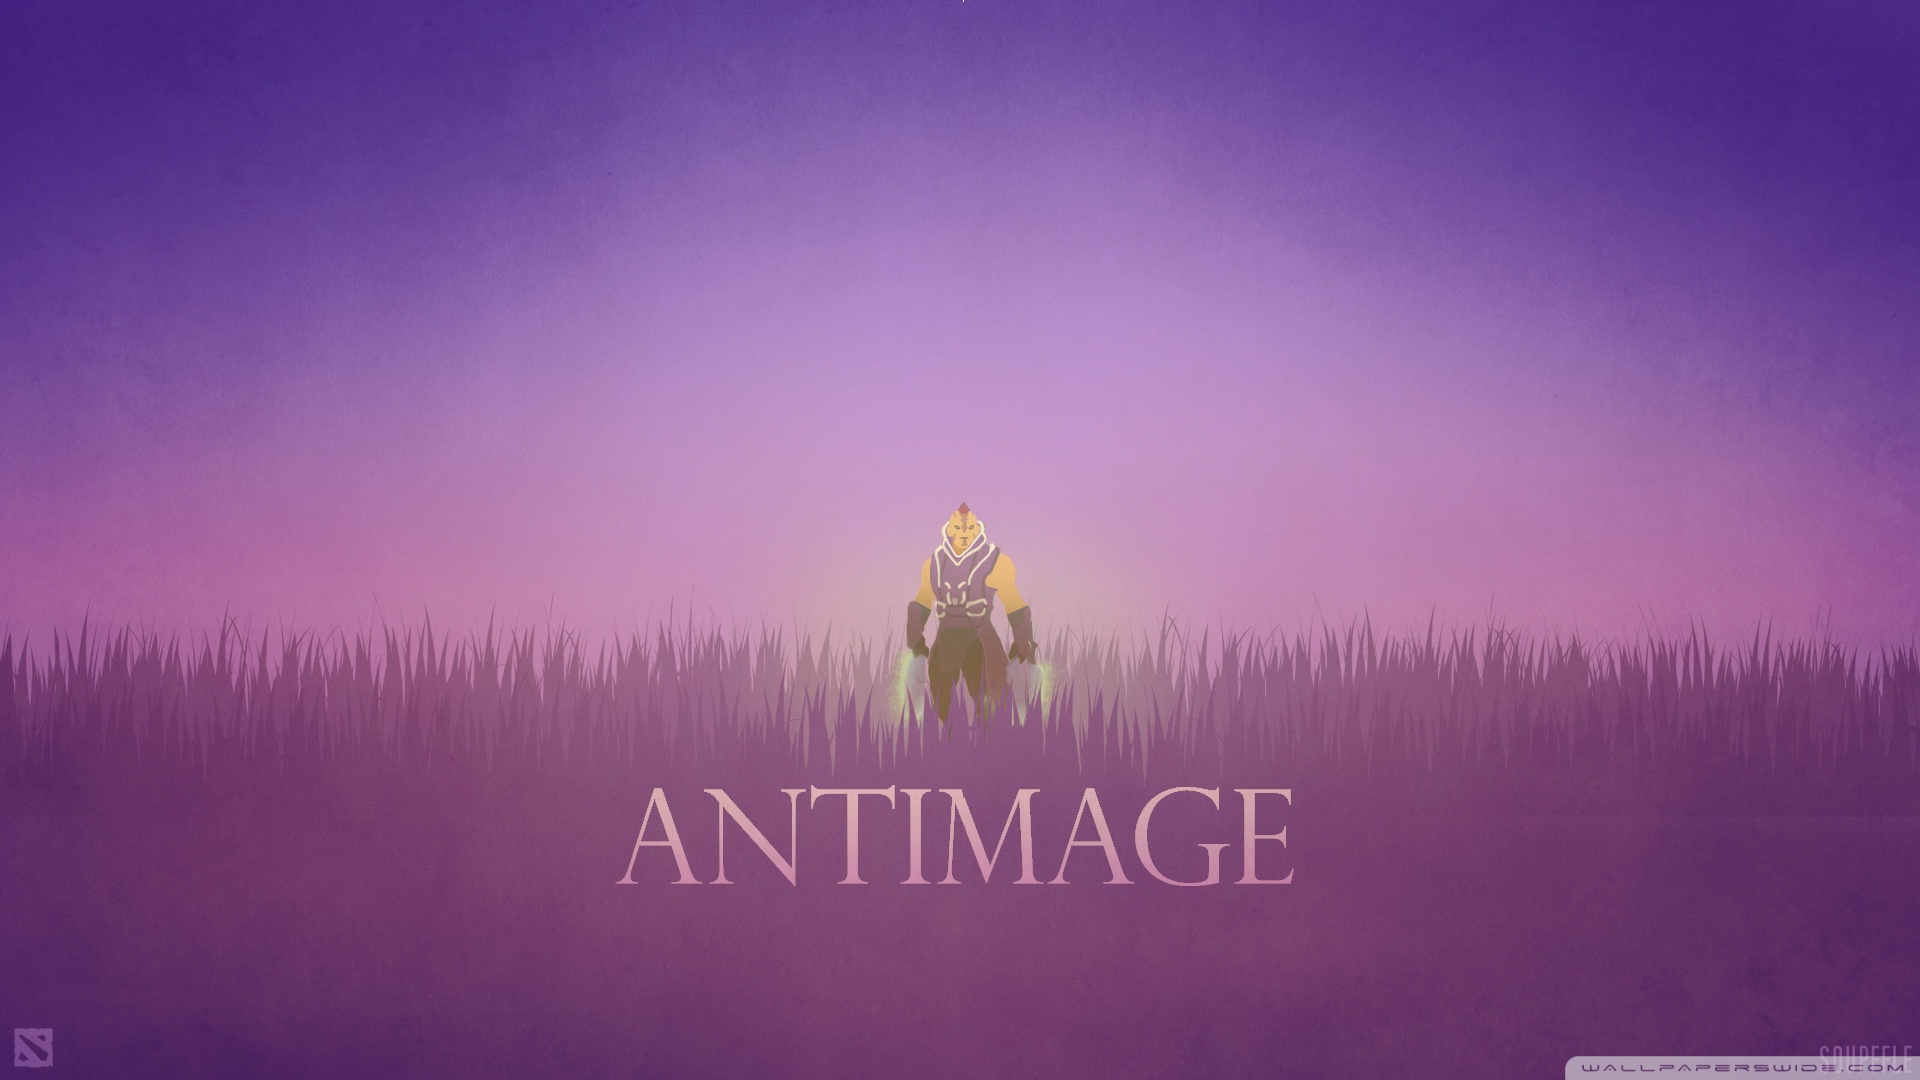 Anti Mage Wallpapers